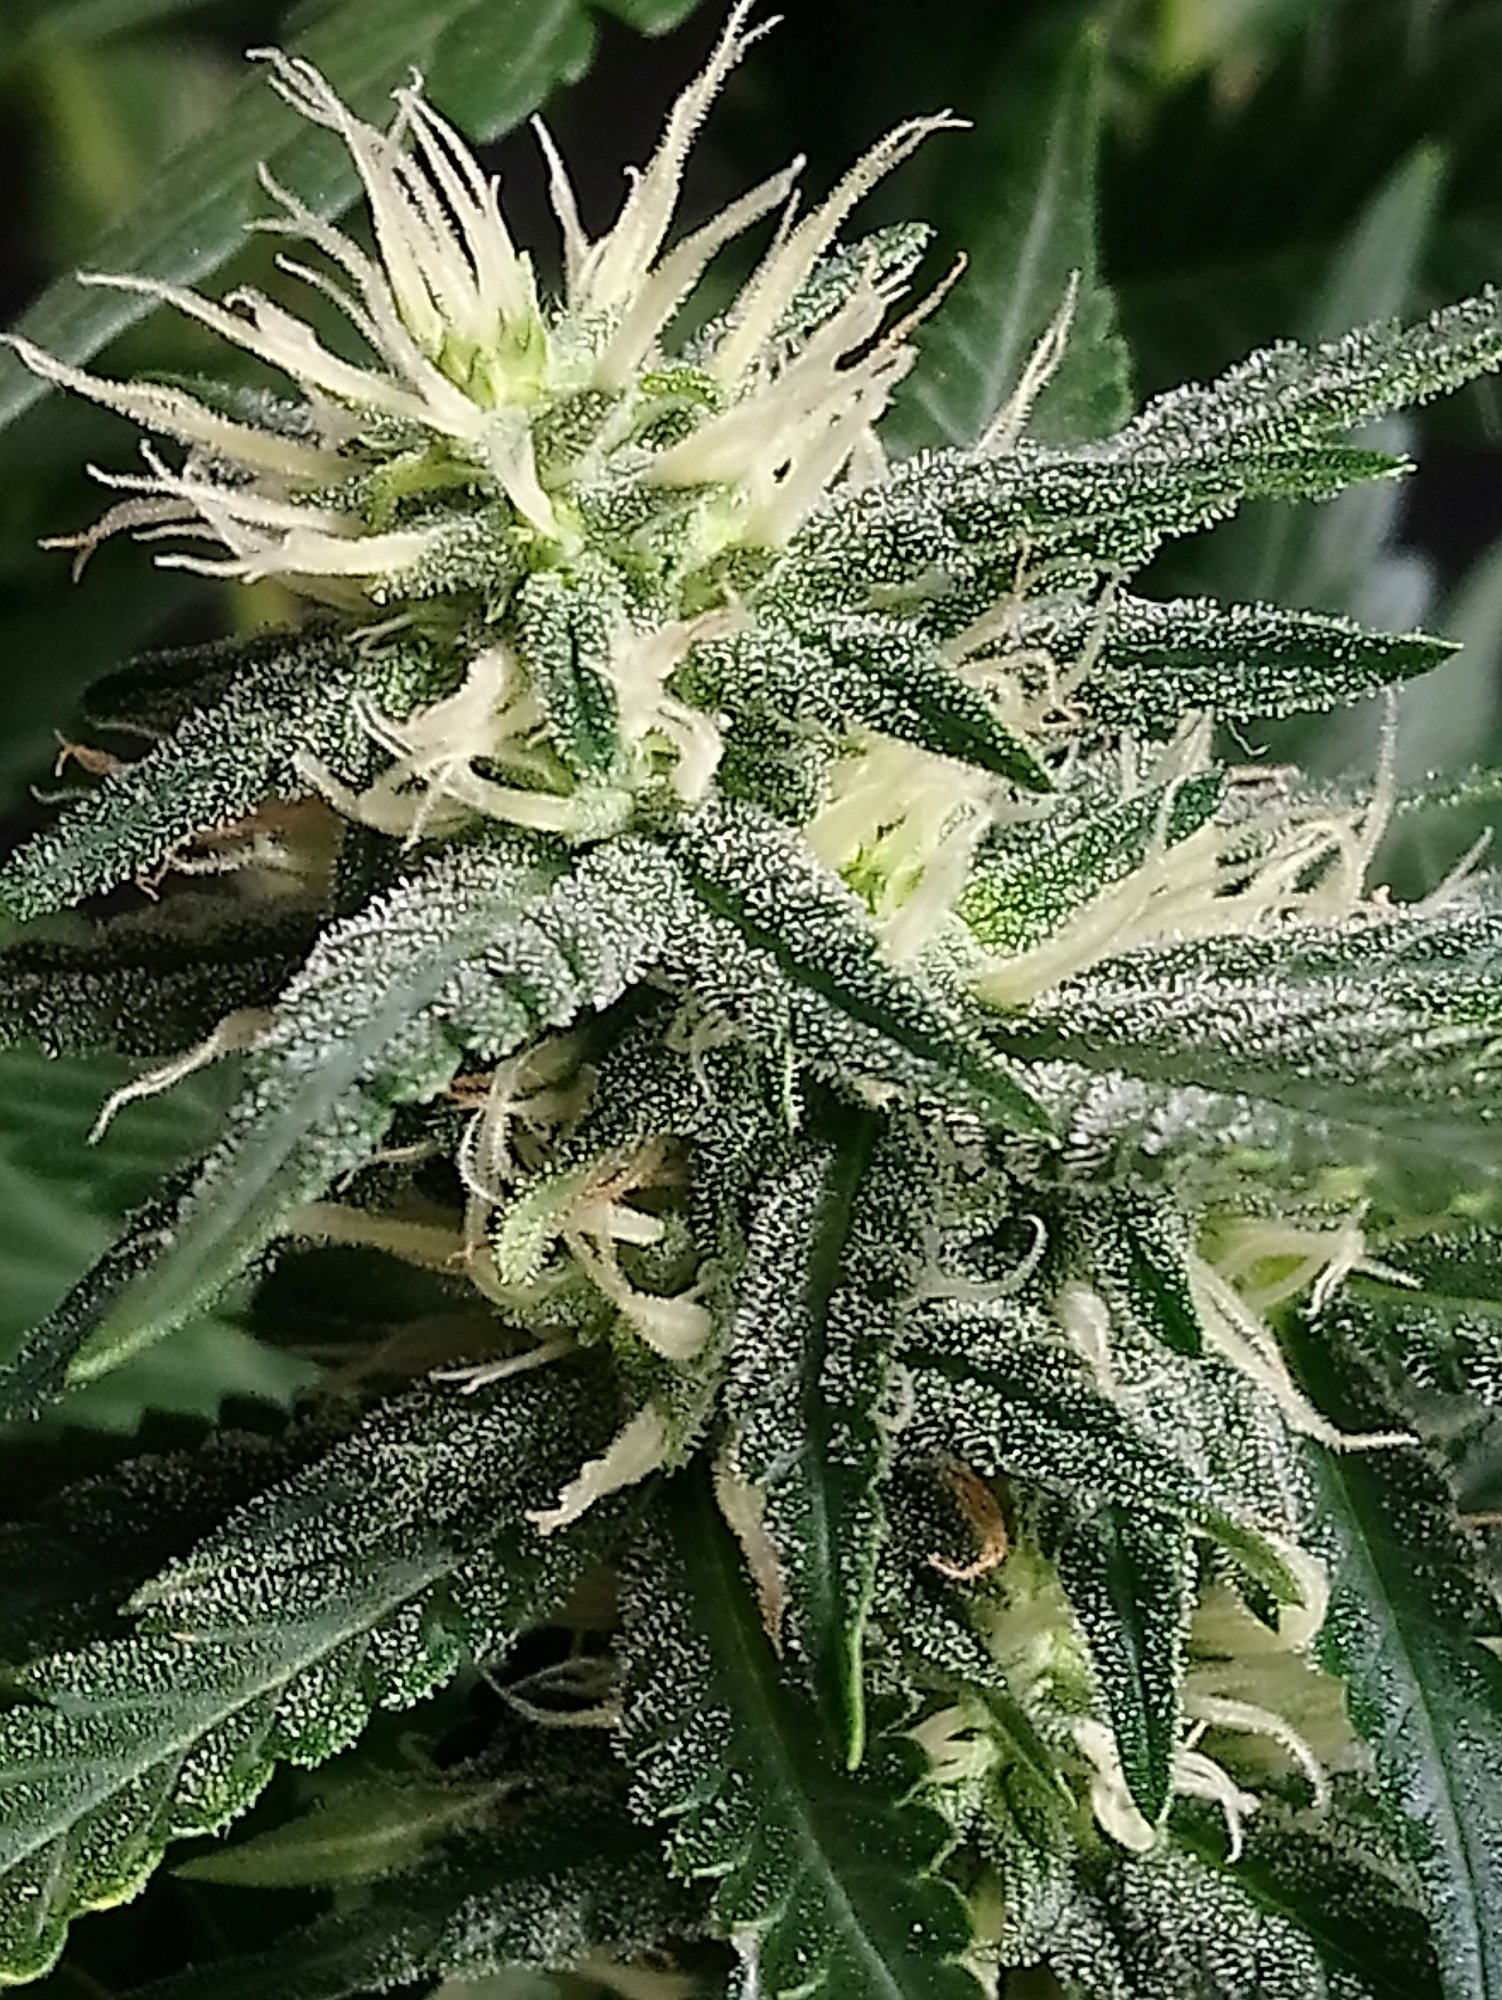 Is this almost ready 1st grow